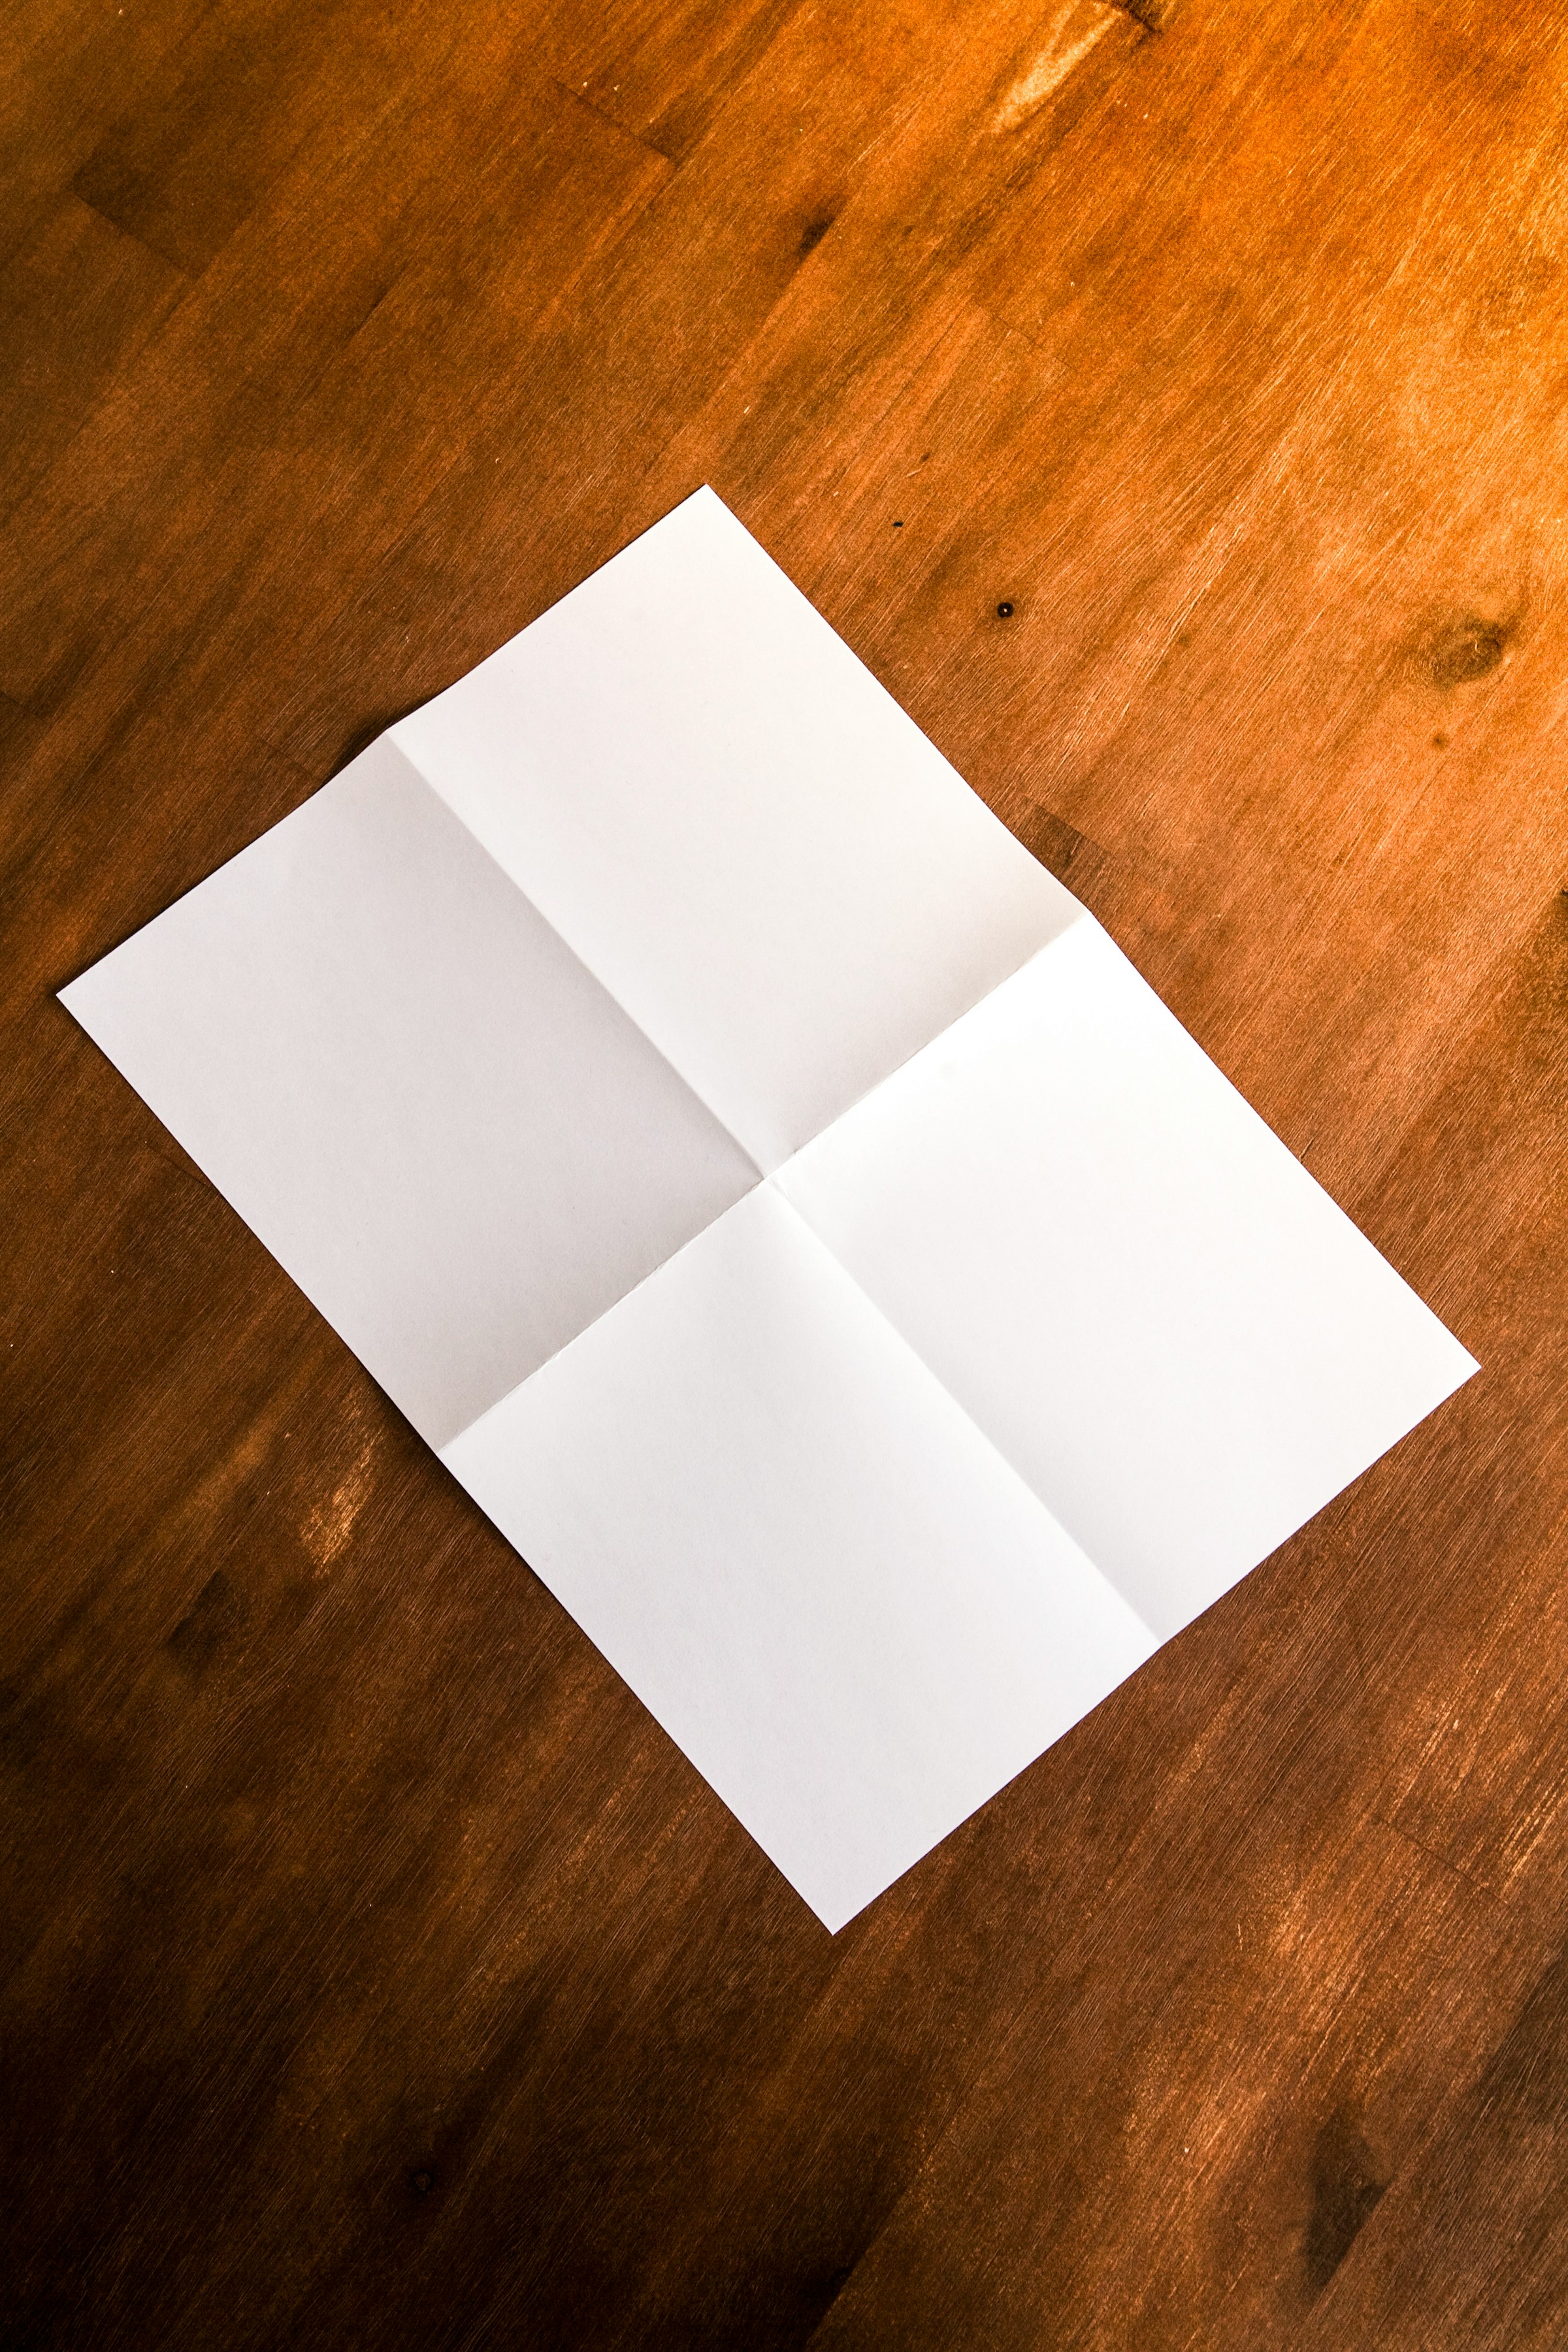 A folded piece of paper on the floor | Source: Unsplash